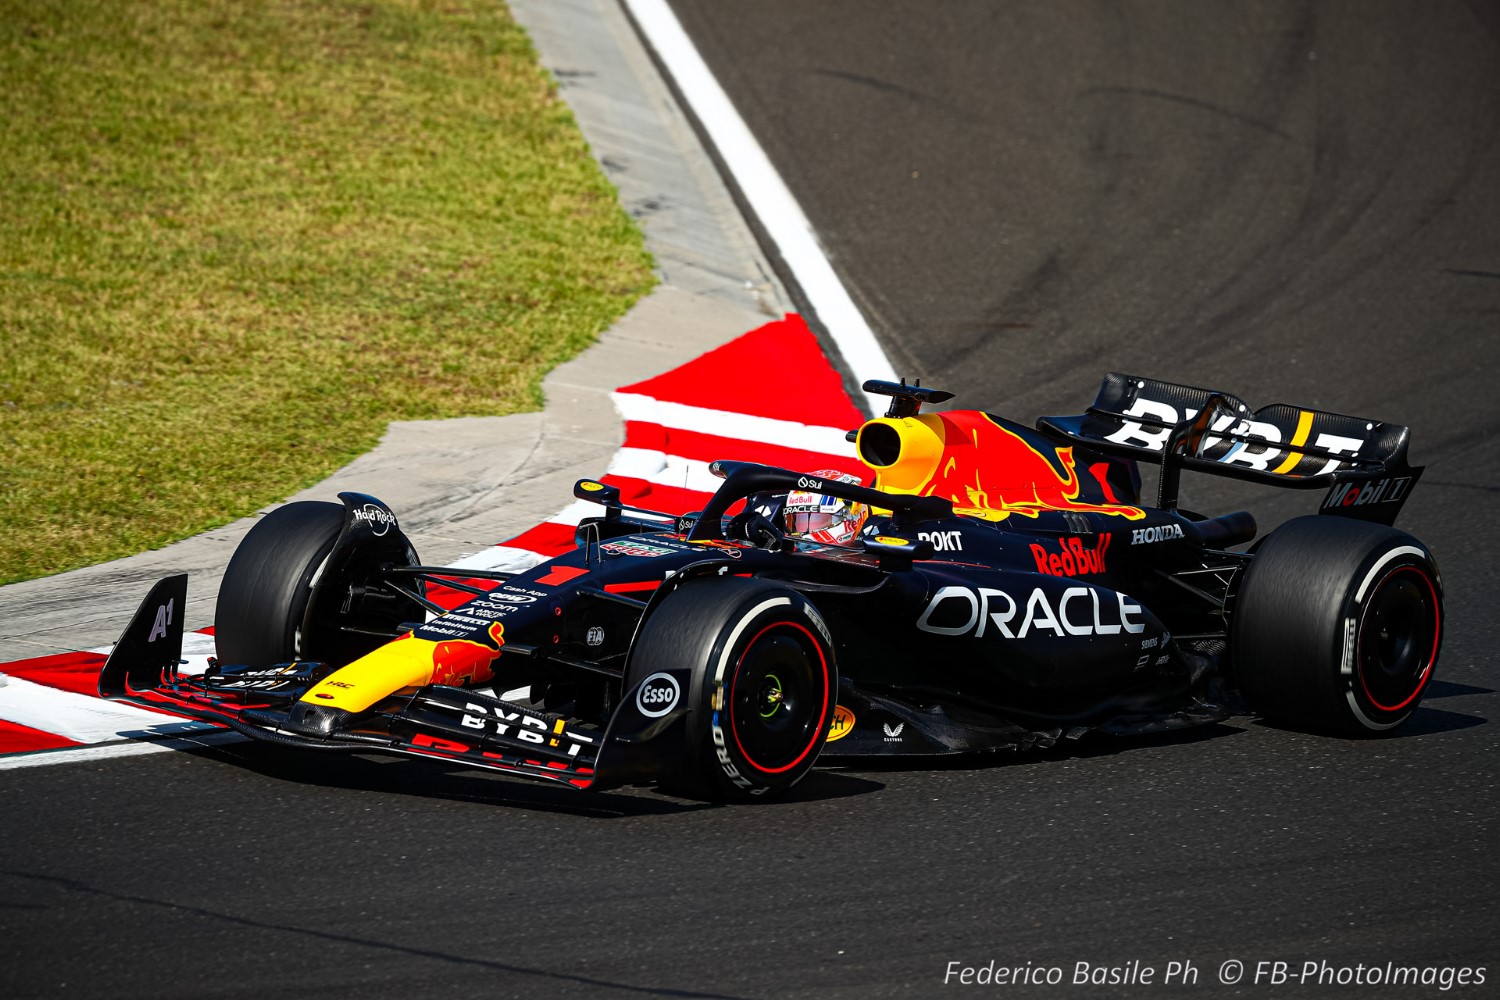 #1 Max Verstappen, (NED) Oracle Red Bull Racing, Honda during the Hungarian GP, Budapest 20-23 July 2023 at the Hungaroring, Formula 1 World championship 2023.